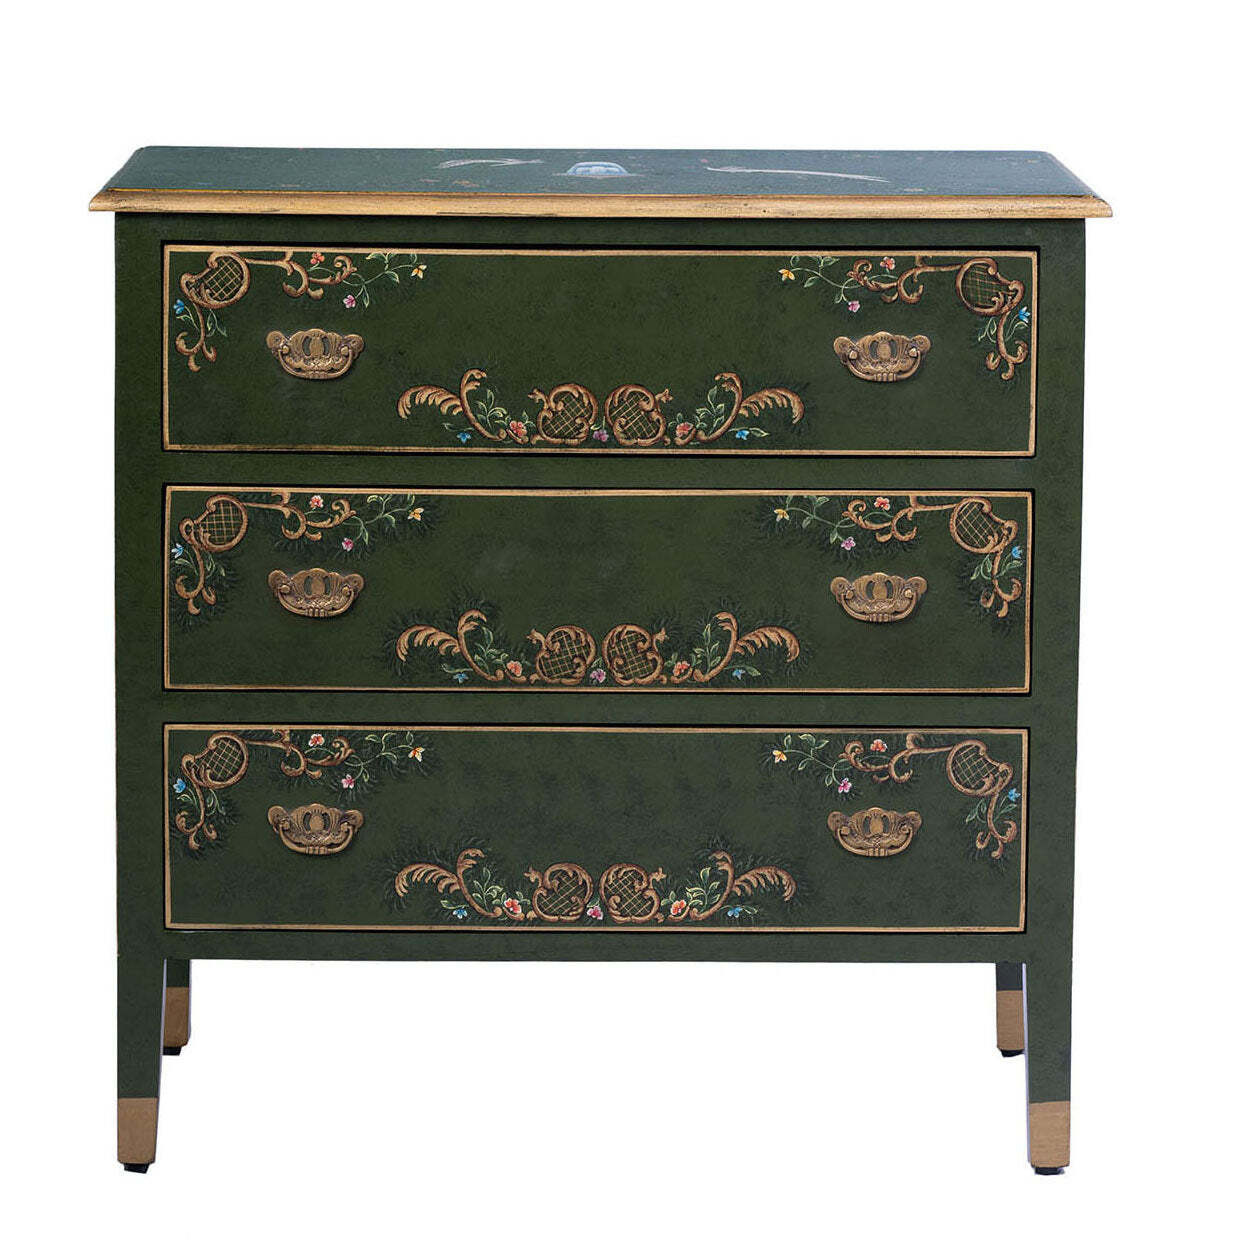 Green Fountain Design 3 Drawer Chest - image 1